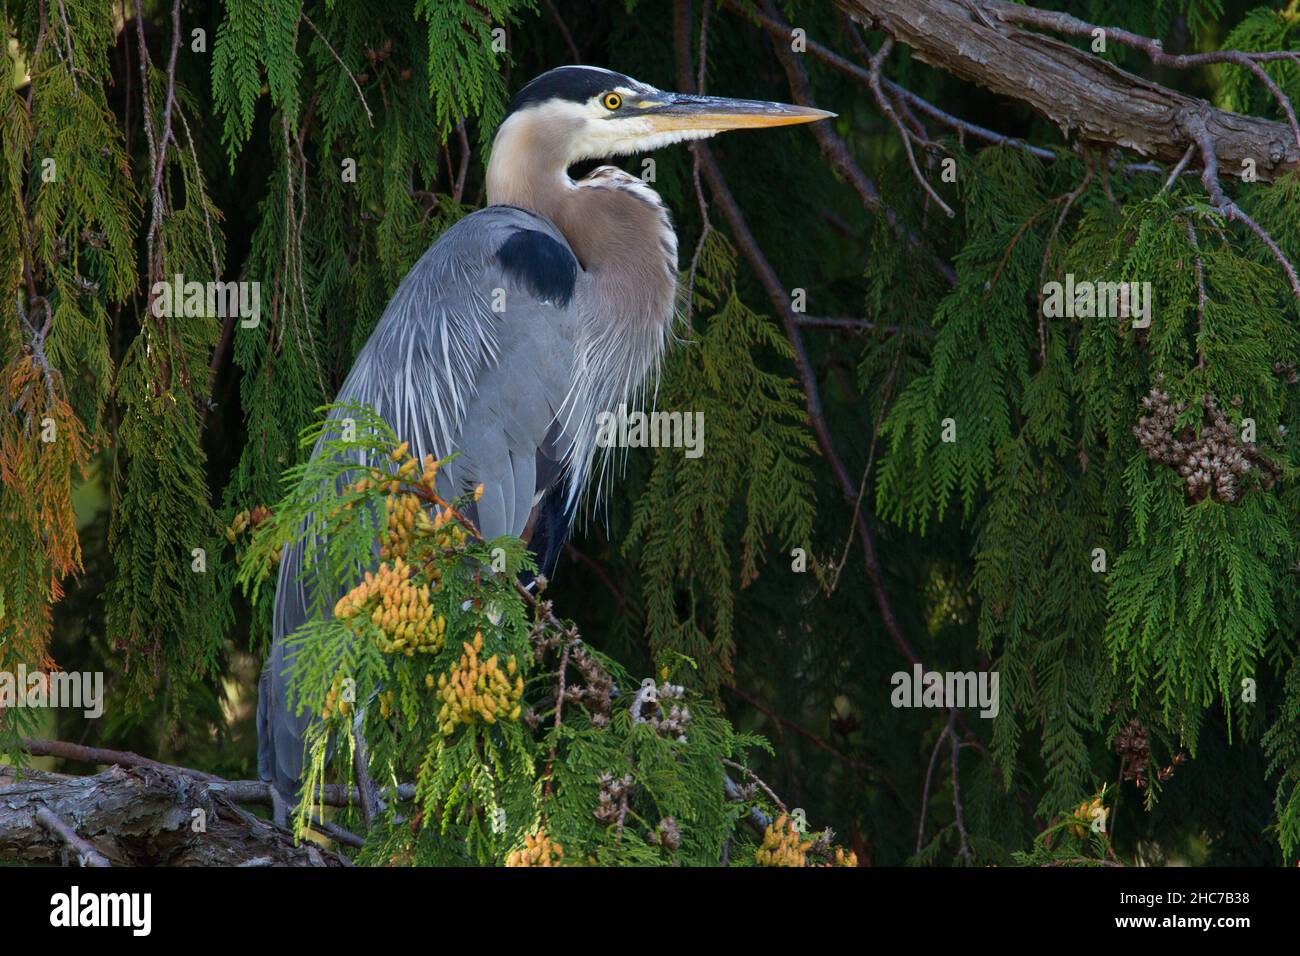 A Great Blue Heron (Ardea herodias) perched on a branch of a cedar tree, in Nanaimo, Vancouver Island, BC, Canada in September Stock Photo